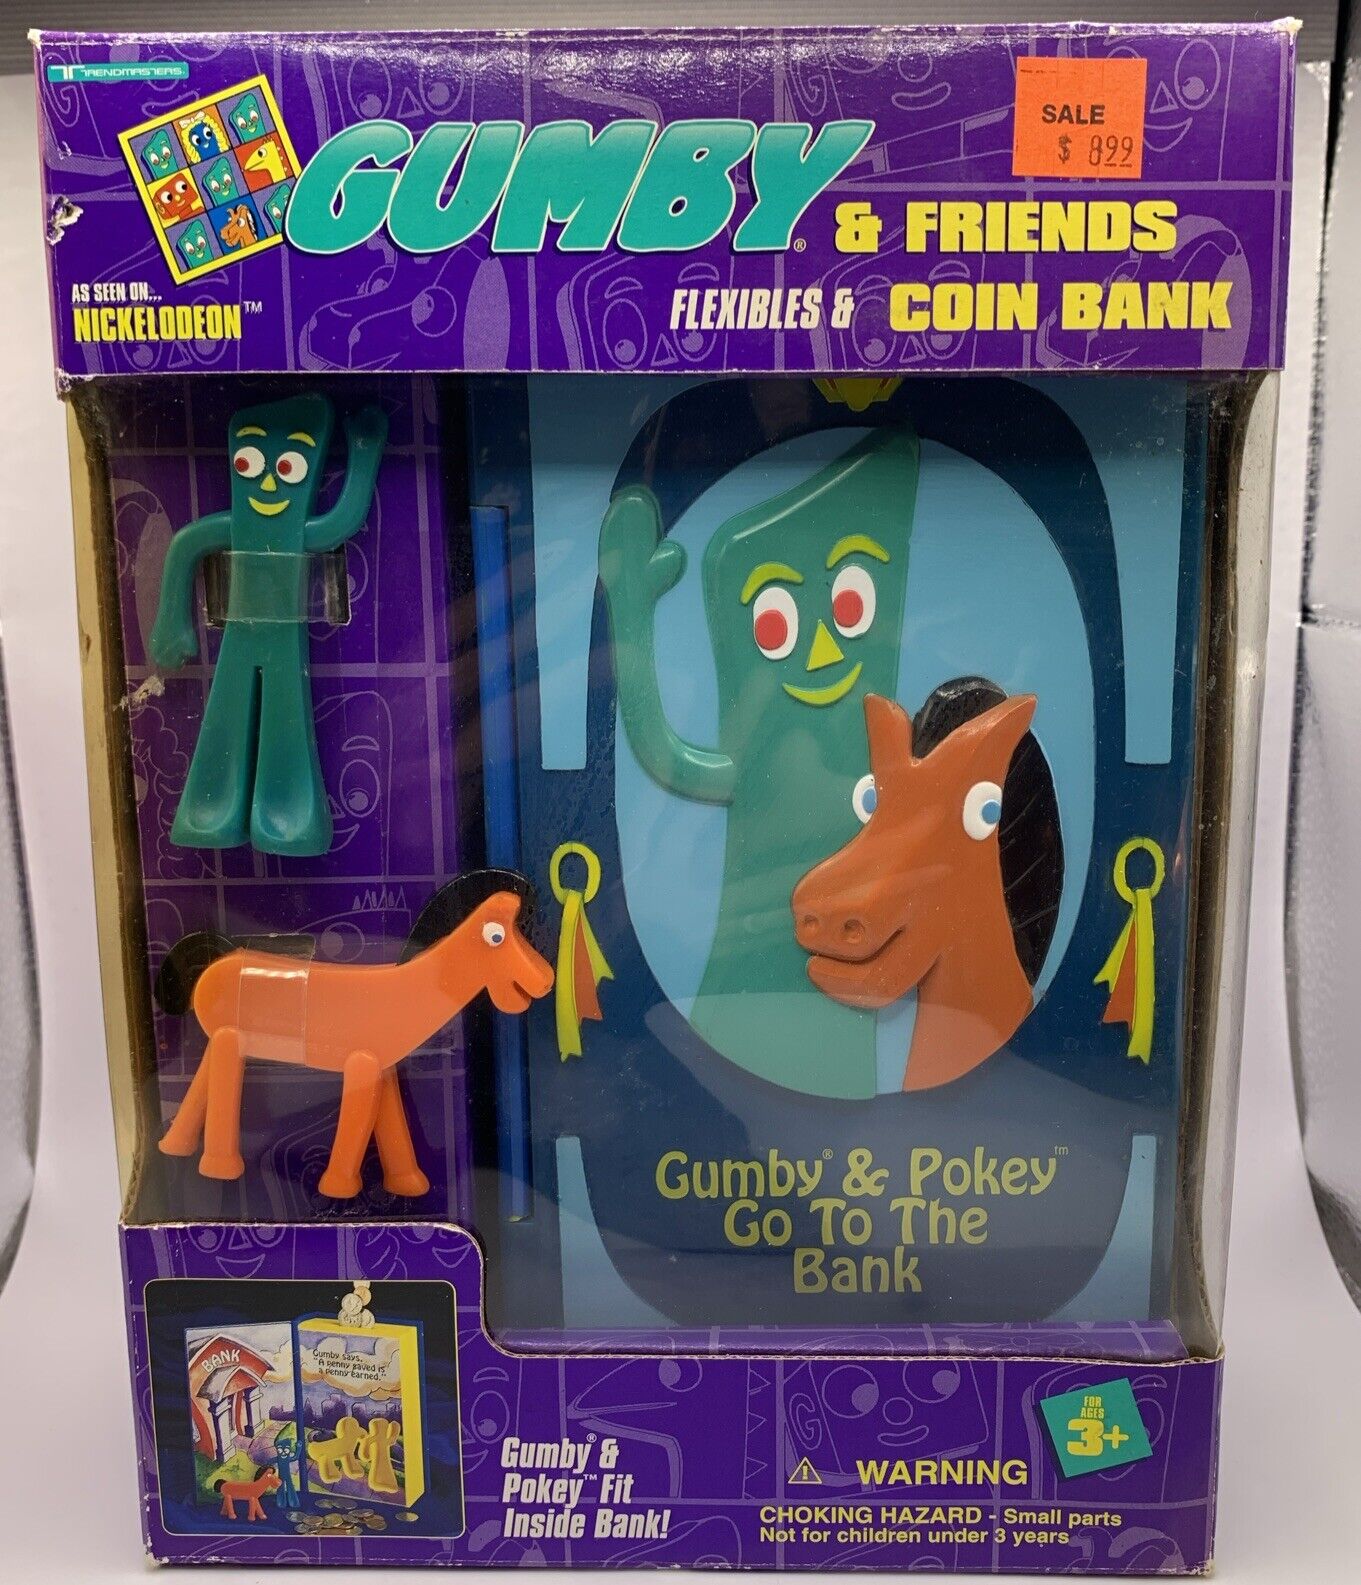 Adventures of Gumby &Friends Coin Bank With Flexible Figured - In Box - 1995